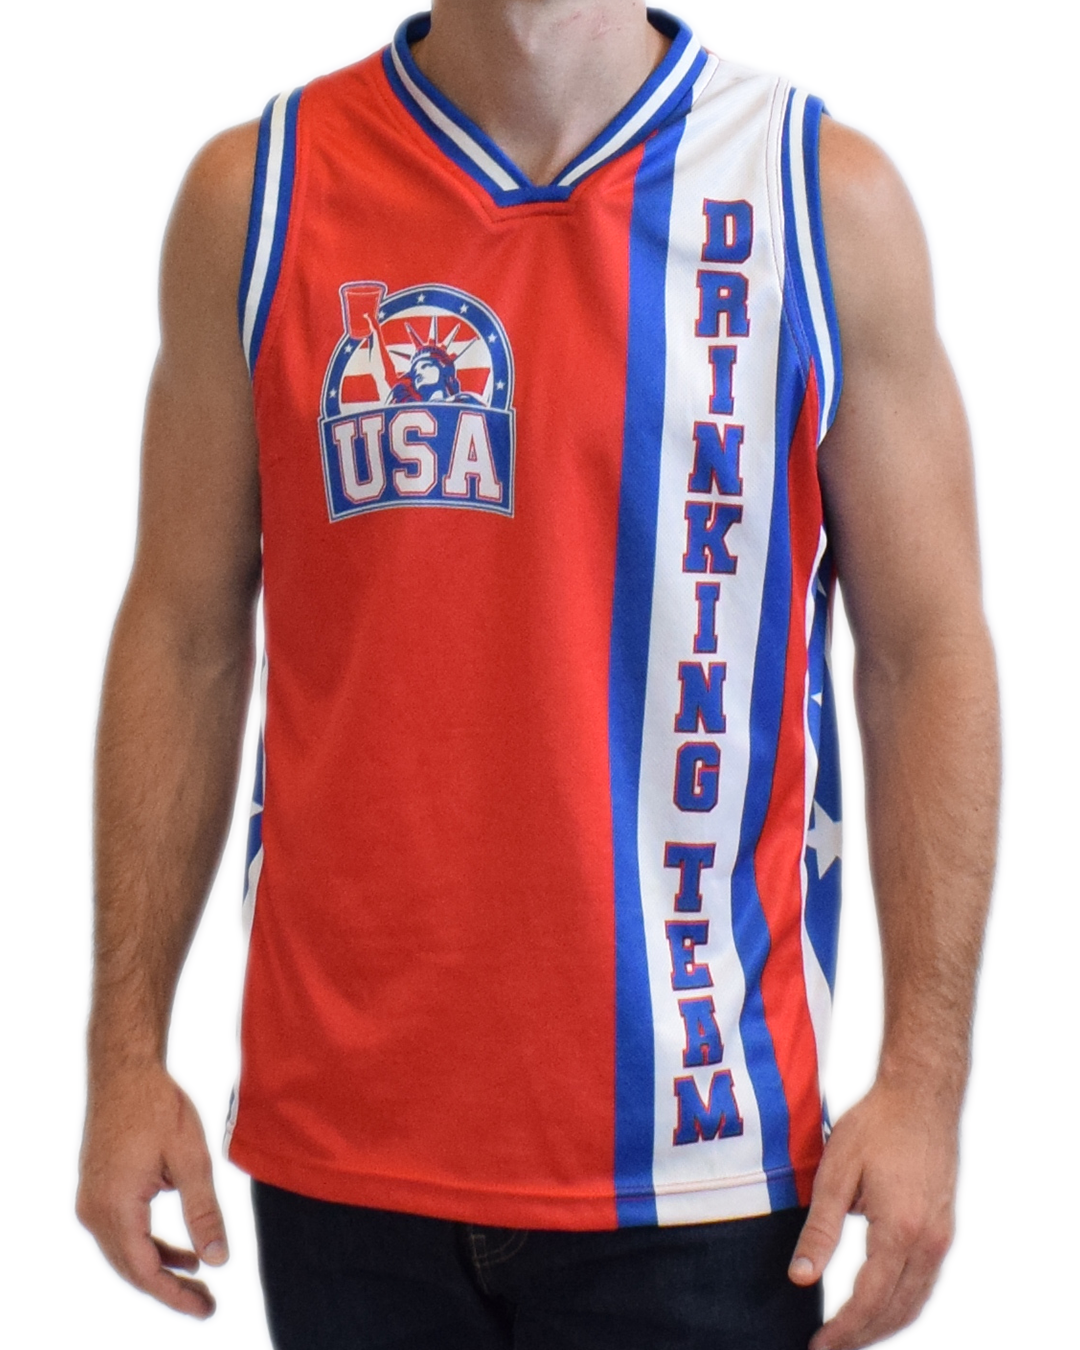 America #1 Basketball Jersey (Red, White & Blue) - USA Drinking Team